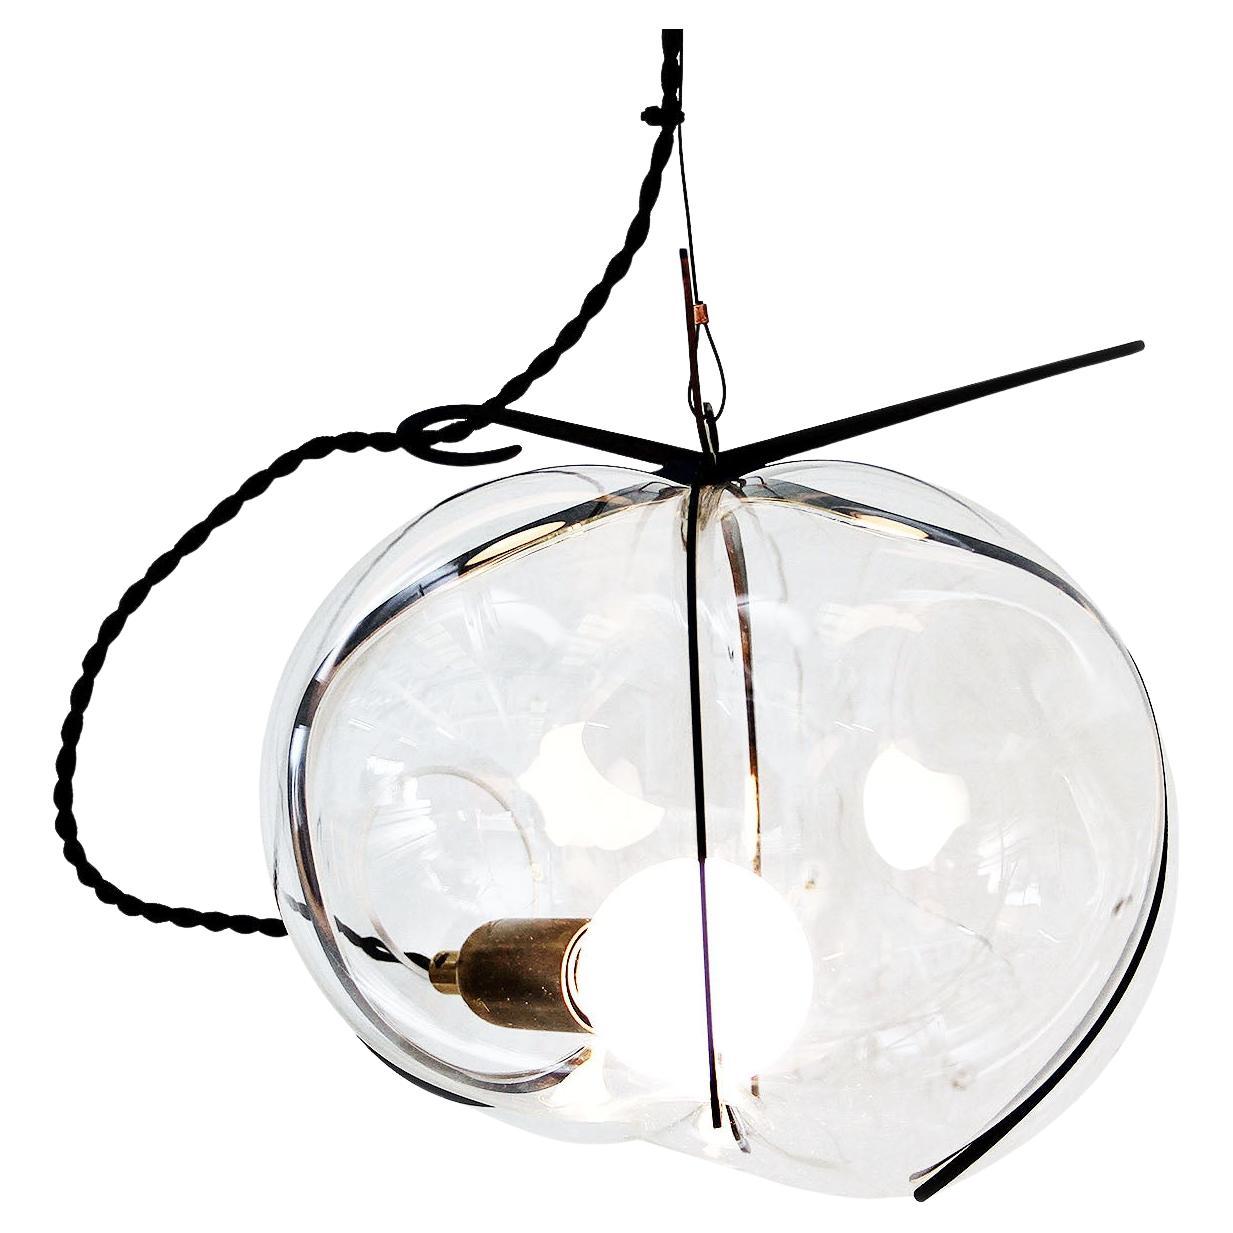 Modern Blown Glass Pendant Light, Exhale by Catie Newell for WDSTCK